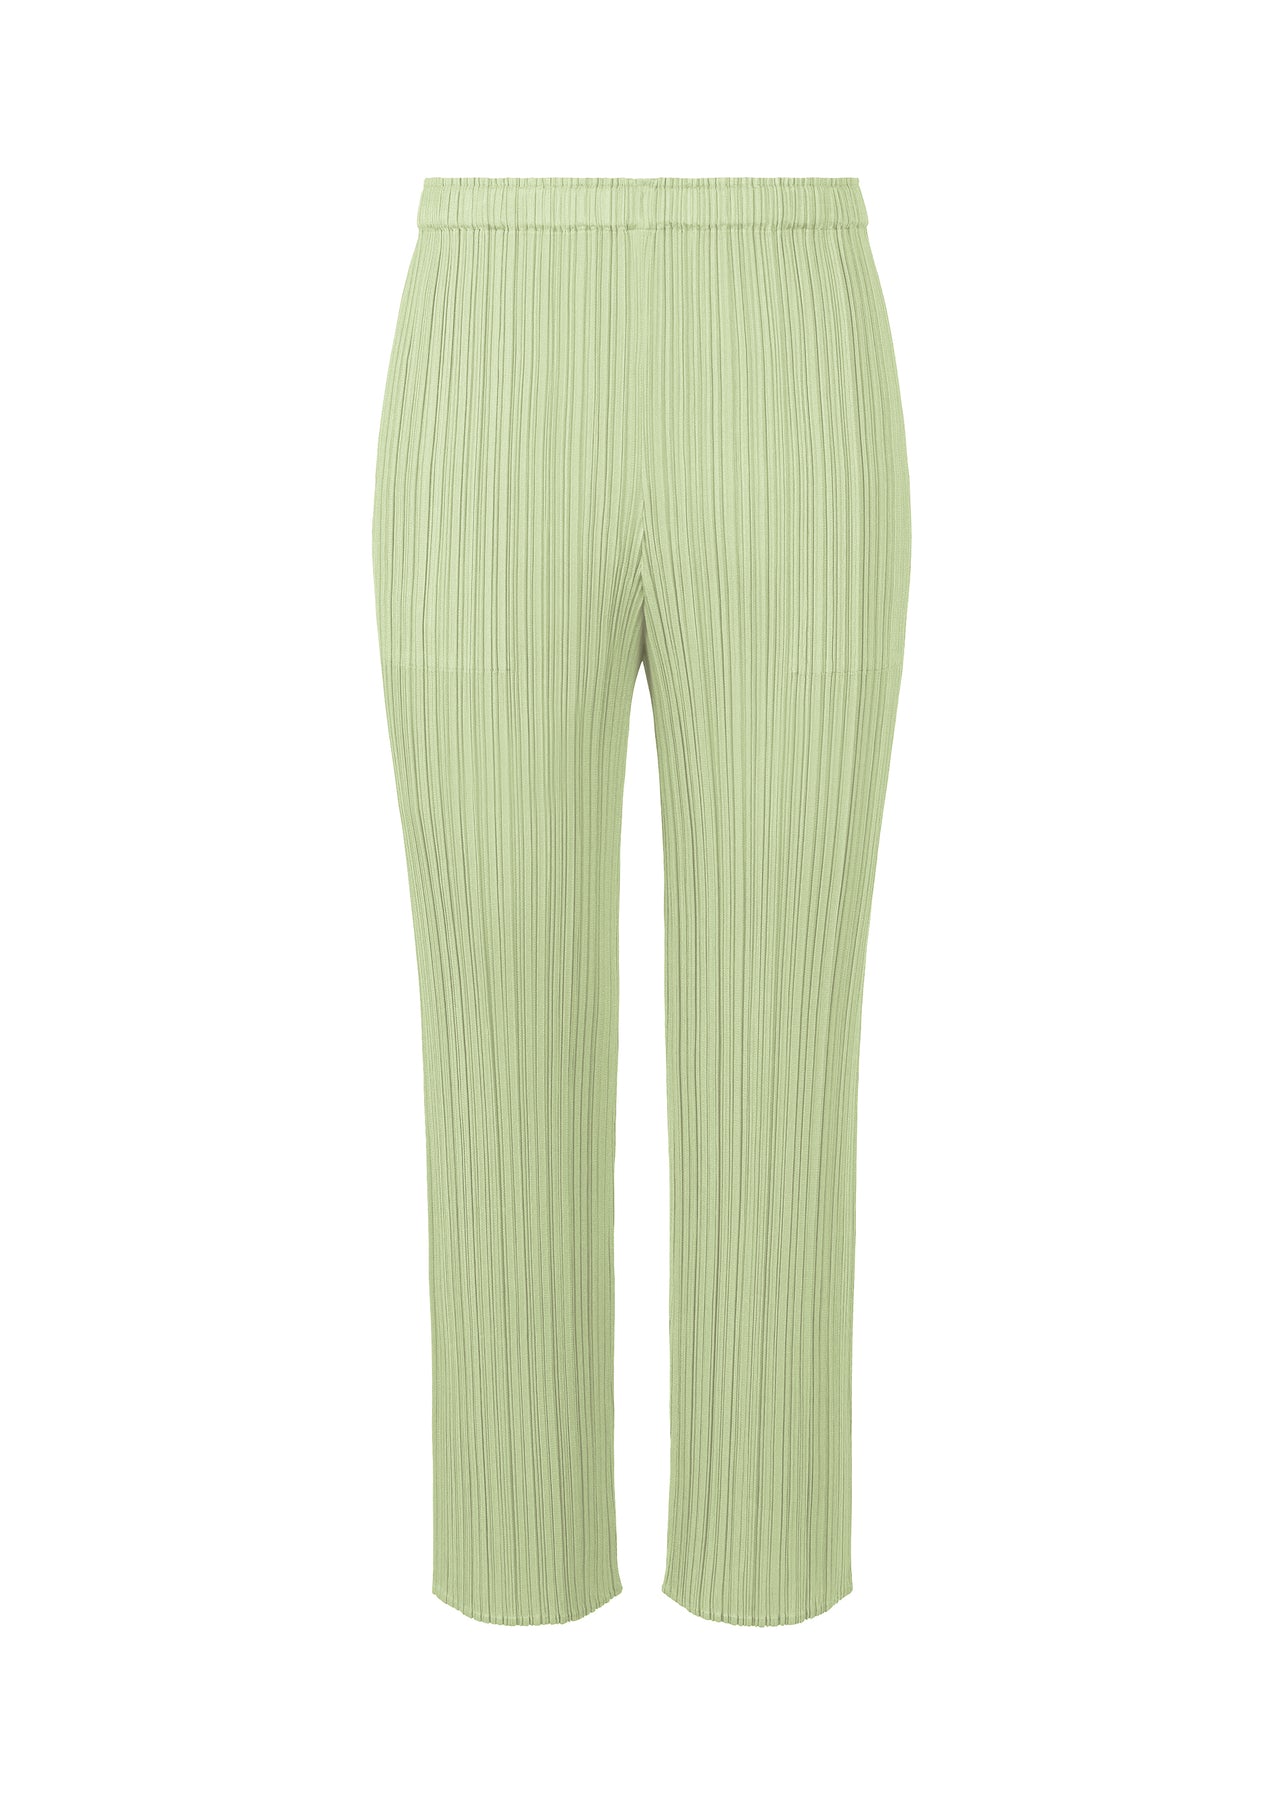 MONTHLY COLORS : NOVEMBER PANTS | The official ISSEY MIYAKE ONLINE